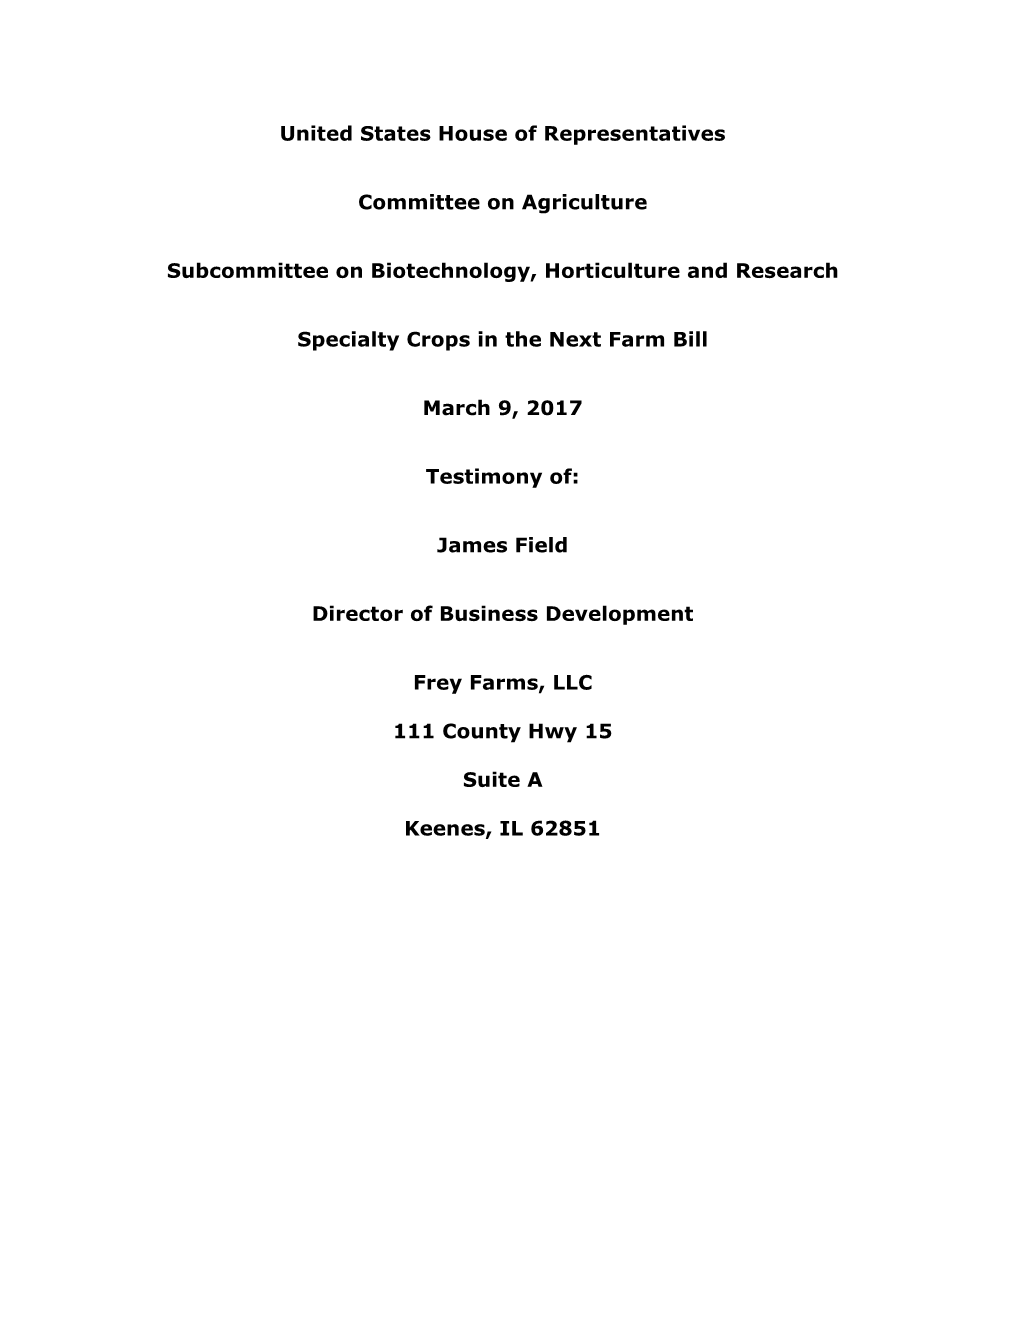 United States House of Representatives Committee on Agriculture Subcommittee on Biotechnology, Horticulture and Research Specia